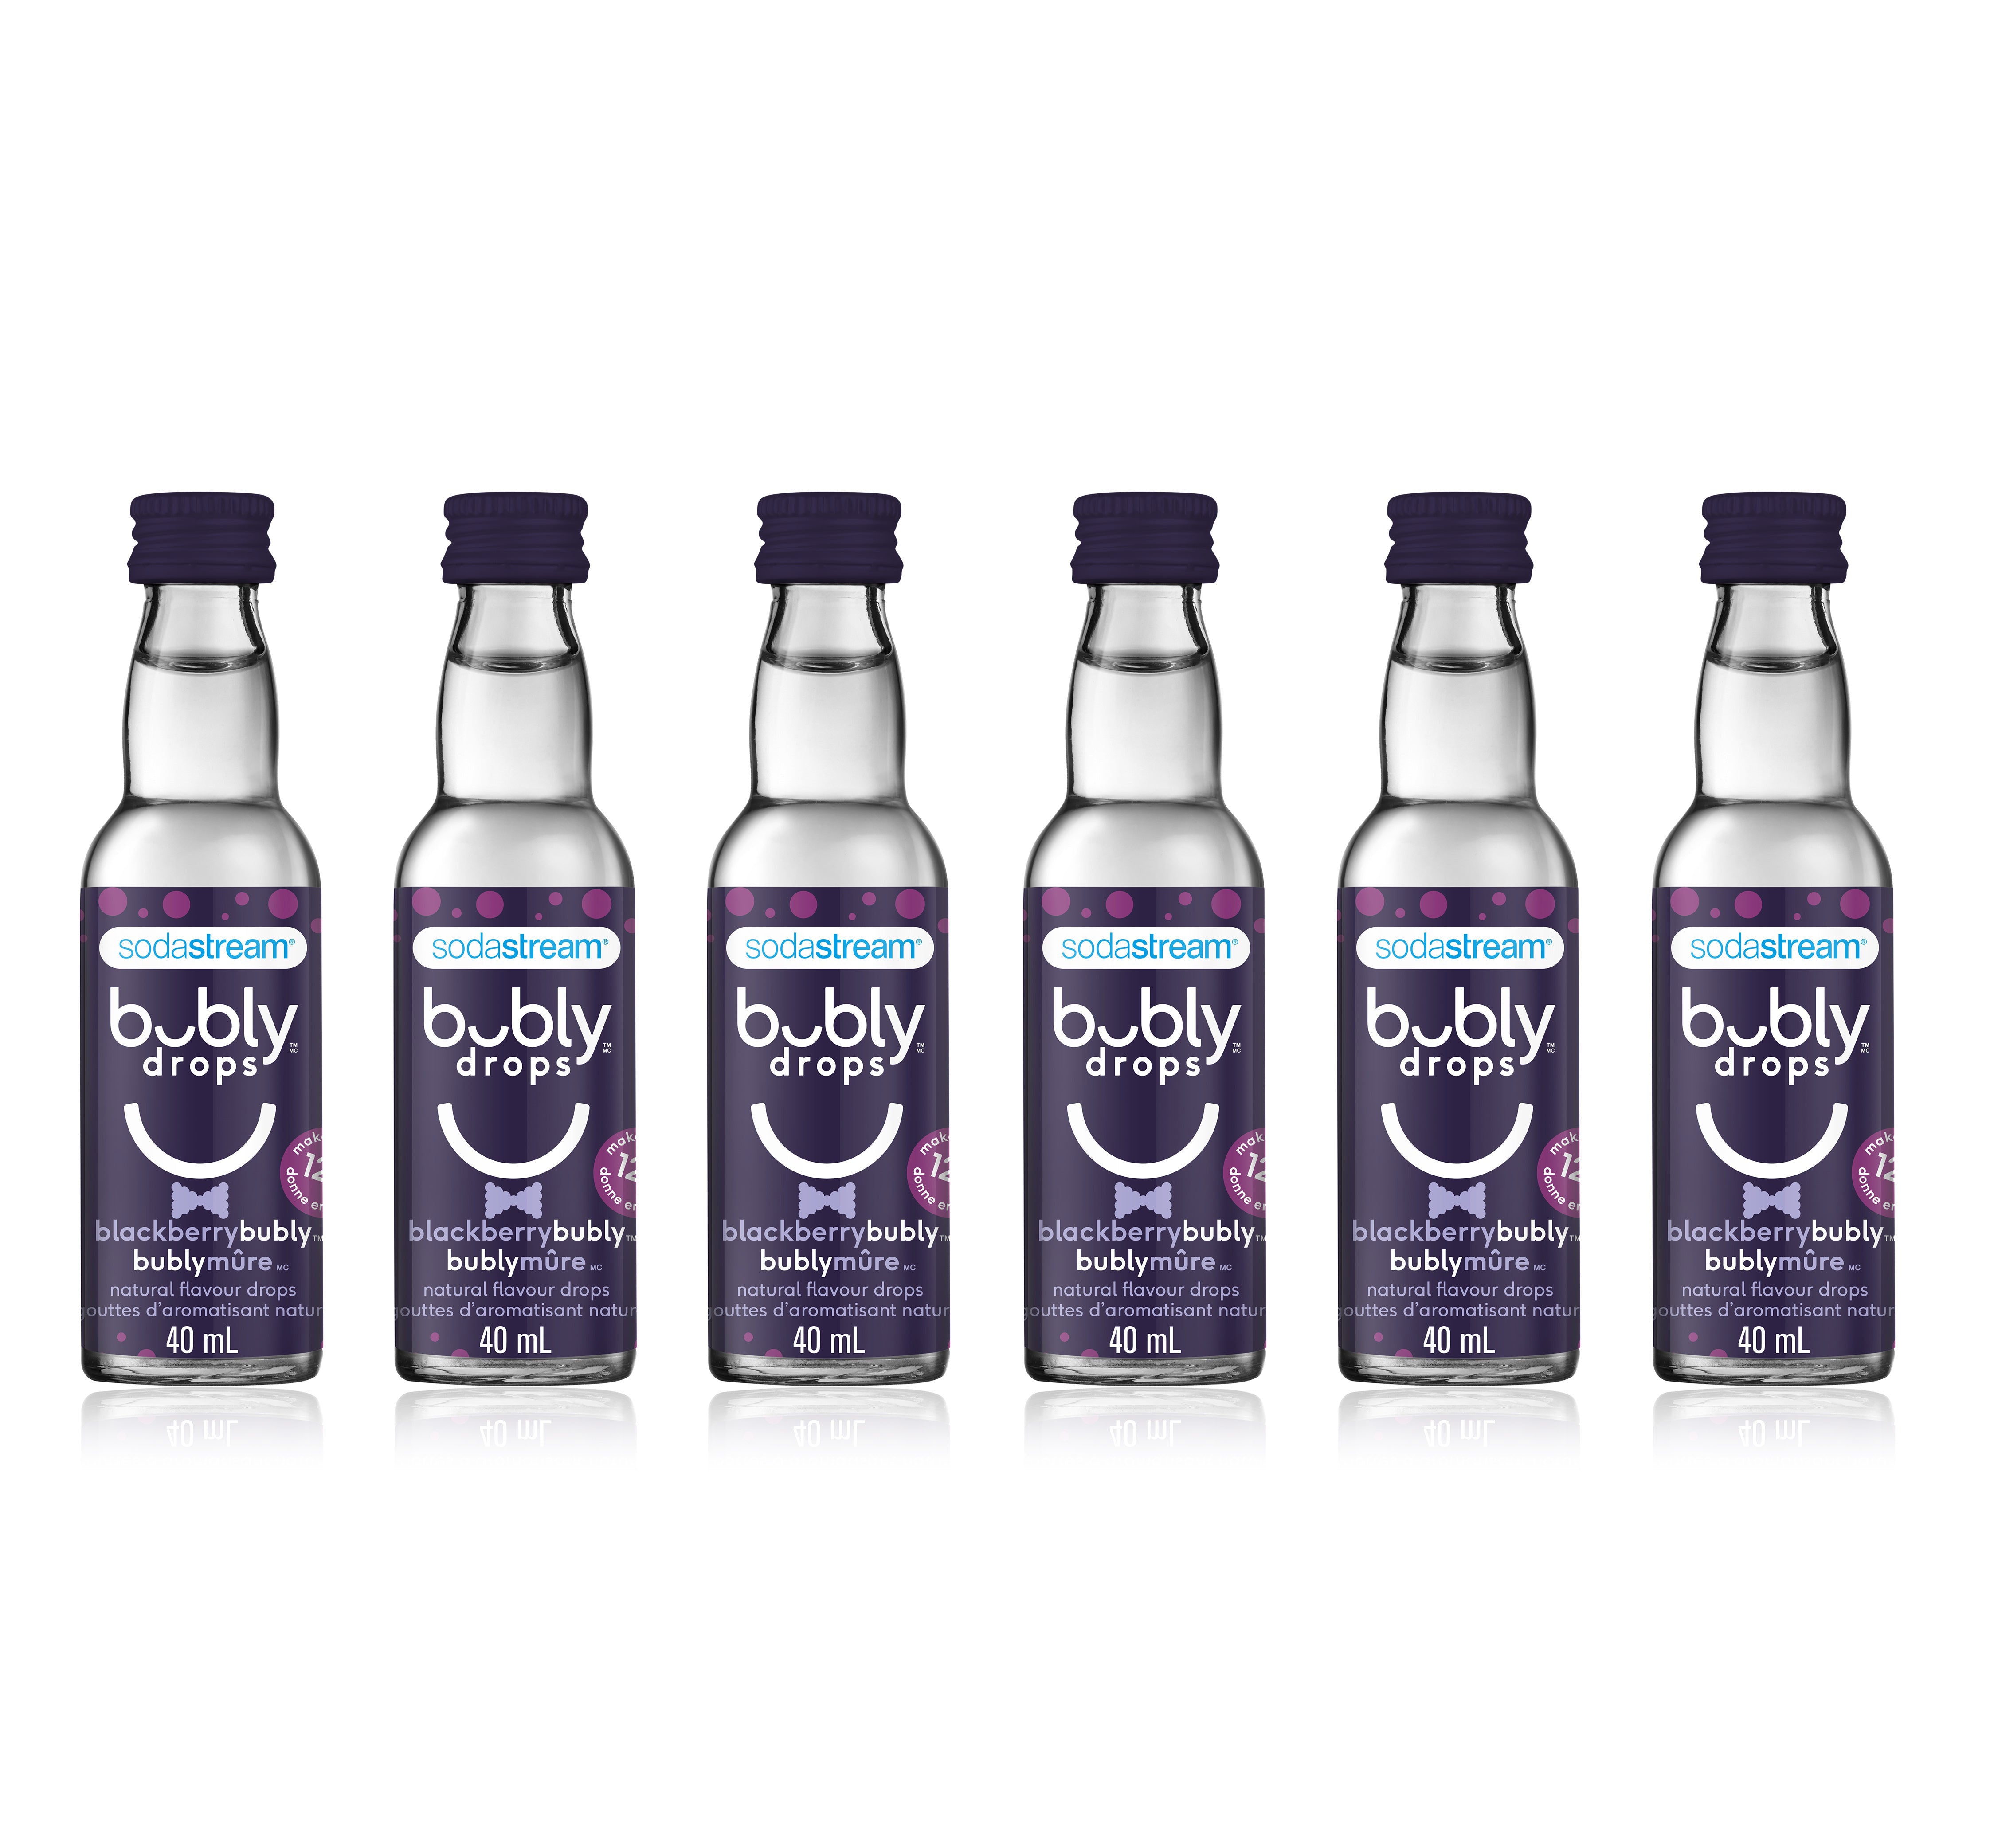 blackberry bubly drops™ 6-Pack sodastream